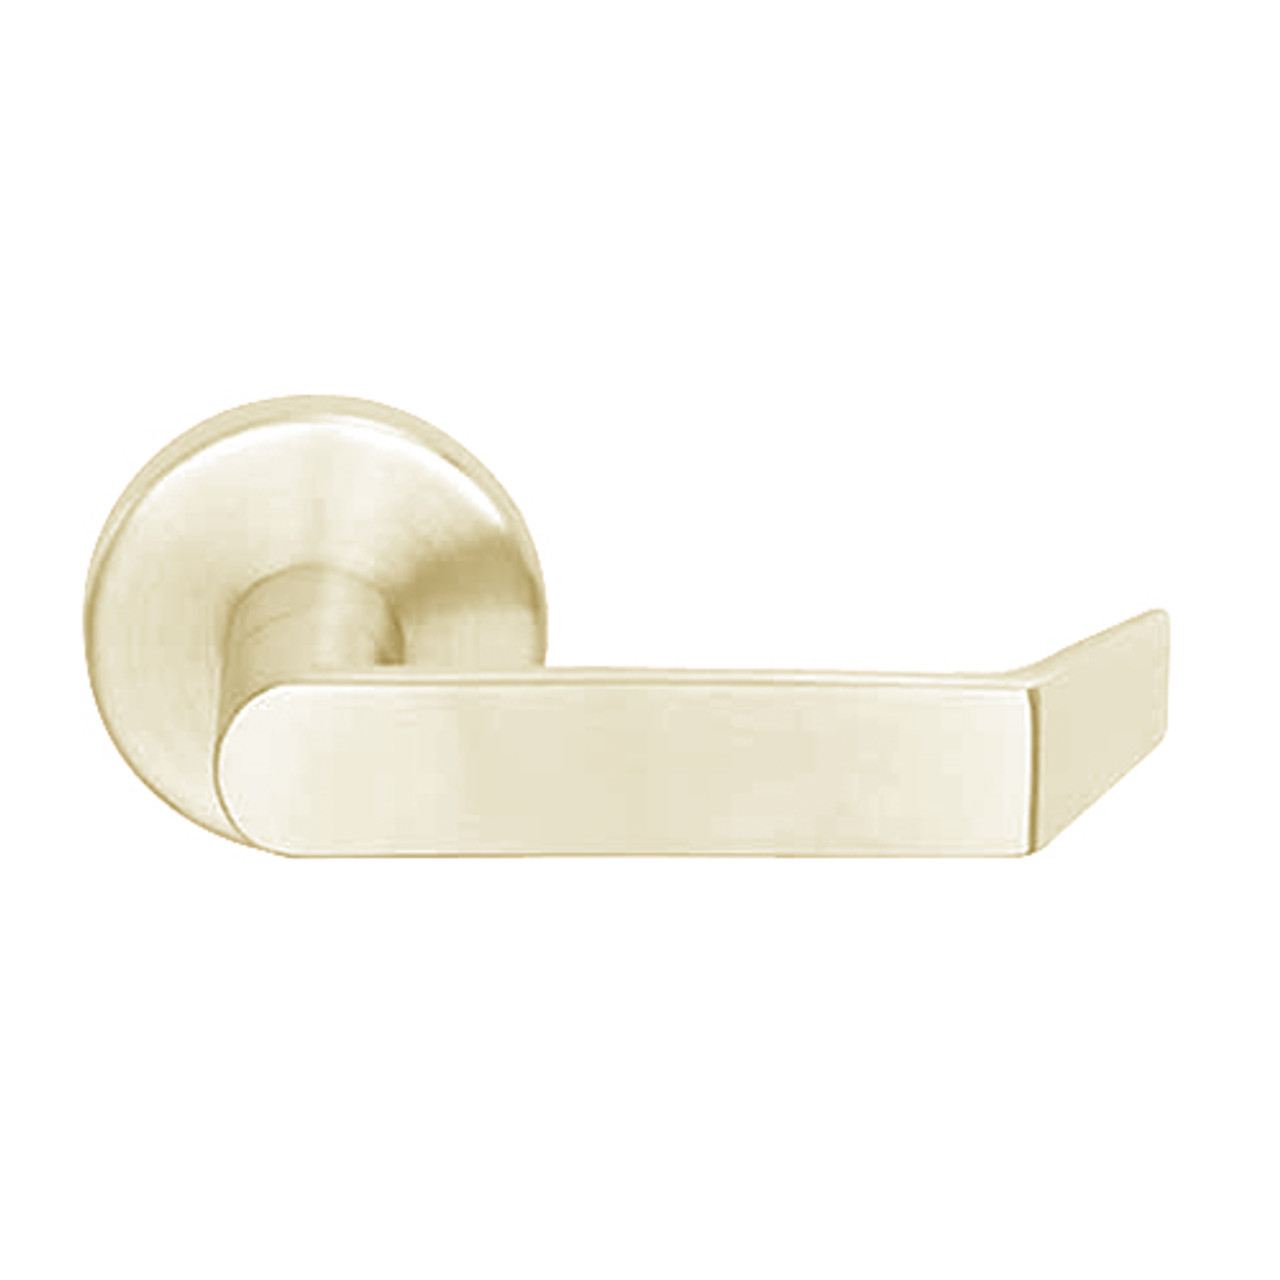 L9456L-06A-606 Schlage L Series Less Cylinder Corridor with Deadbolt Commercial Mortise Lock with 06 Cast Lever Design in Satin Brass